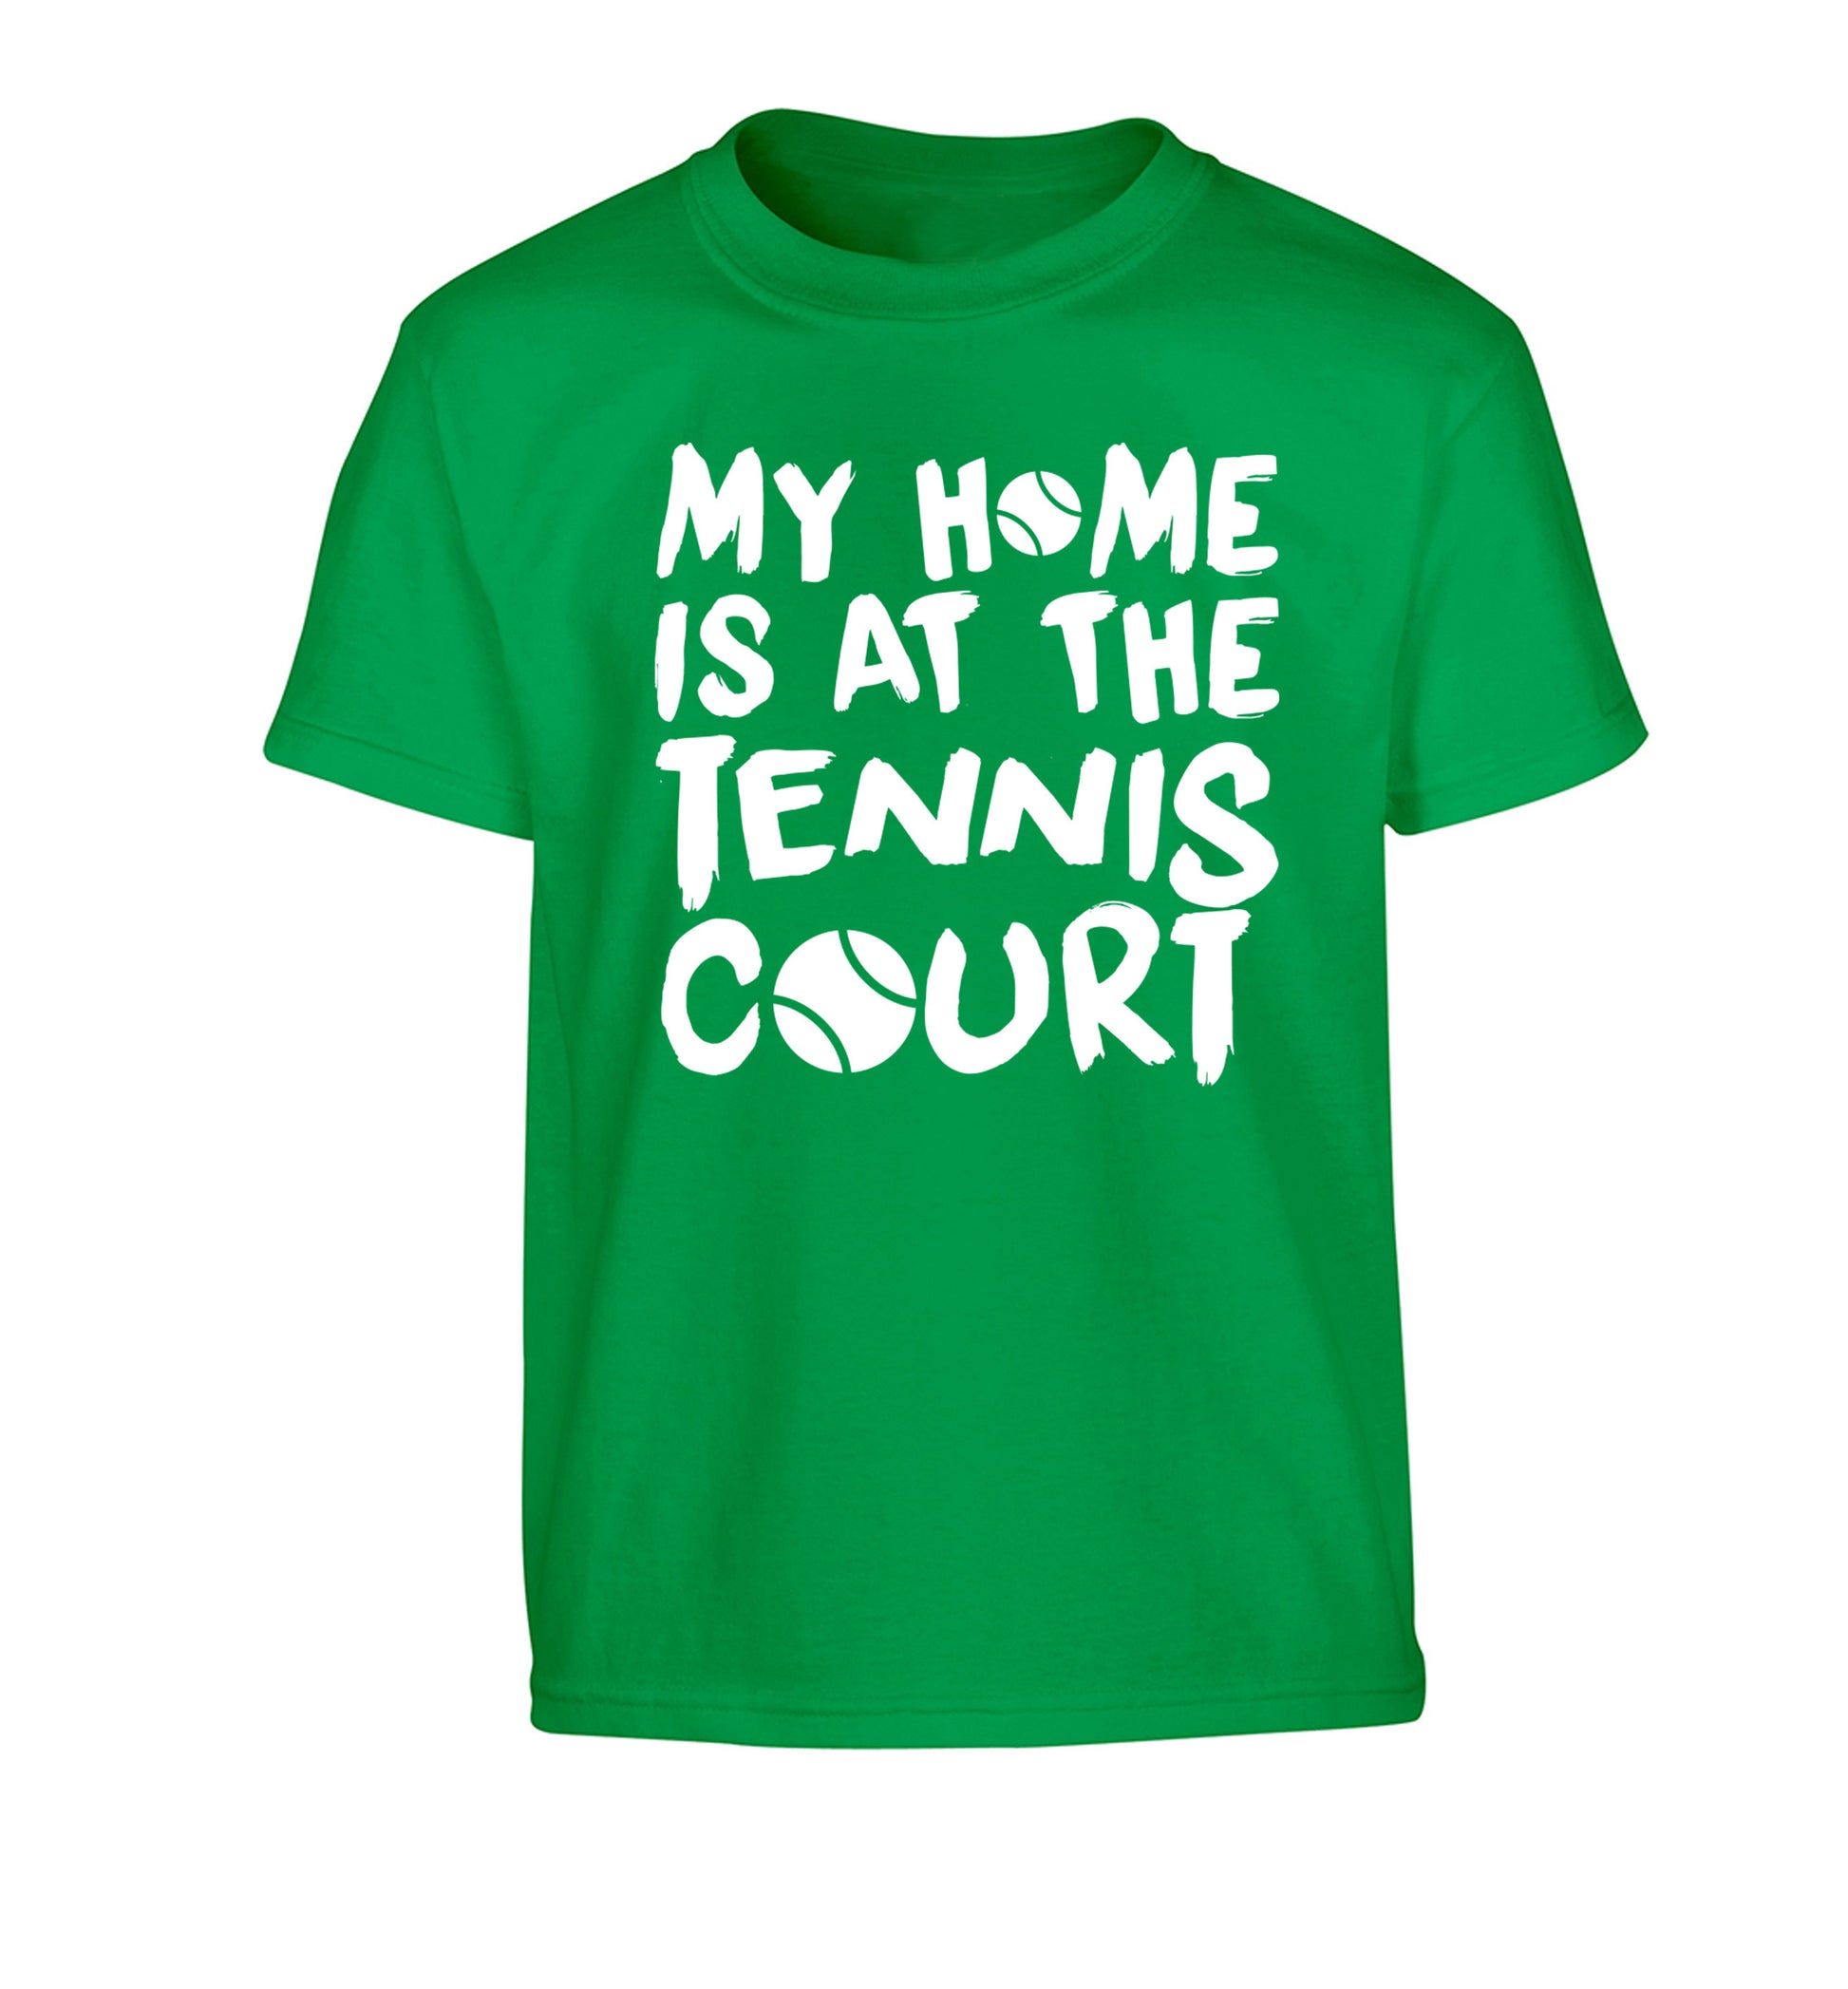 My home is at the tennis court Children's green Tshirt 12-14 Years